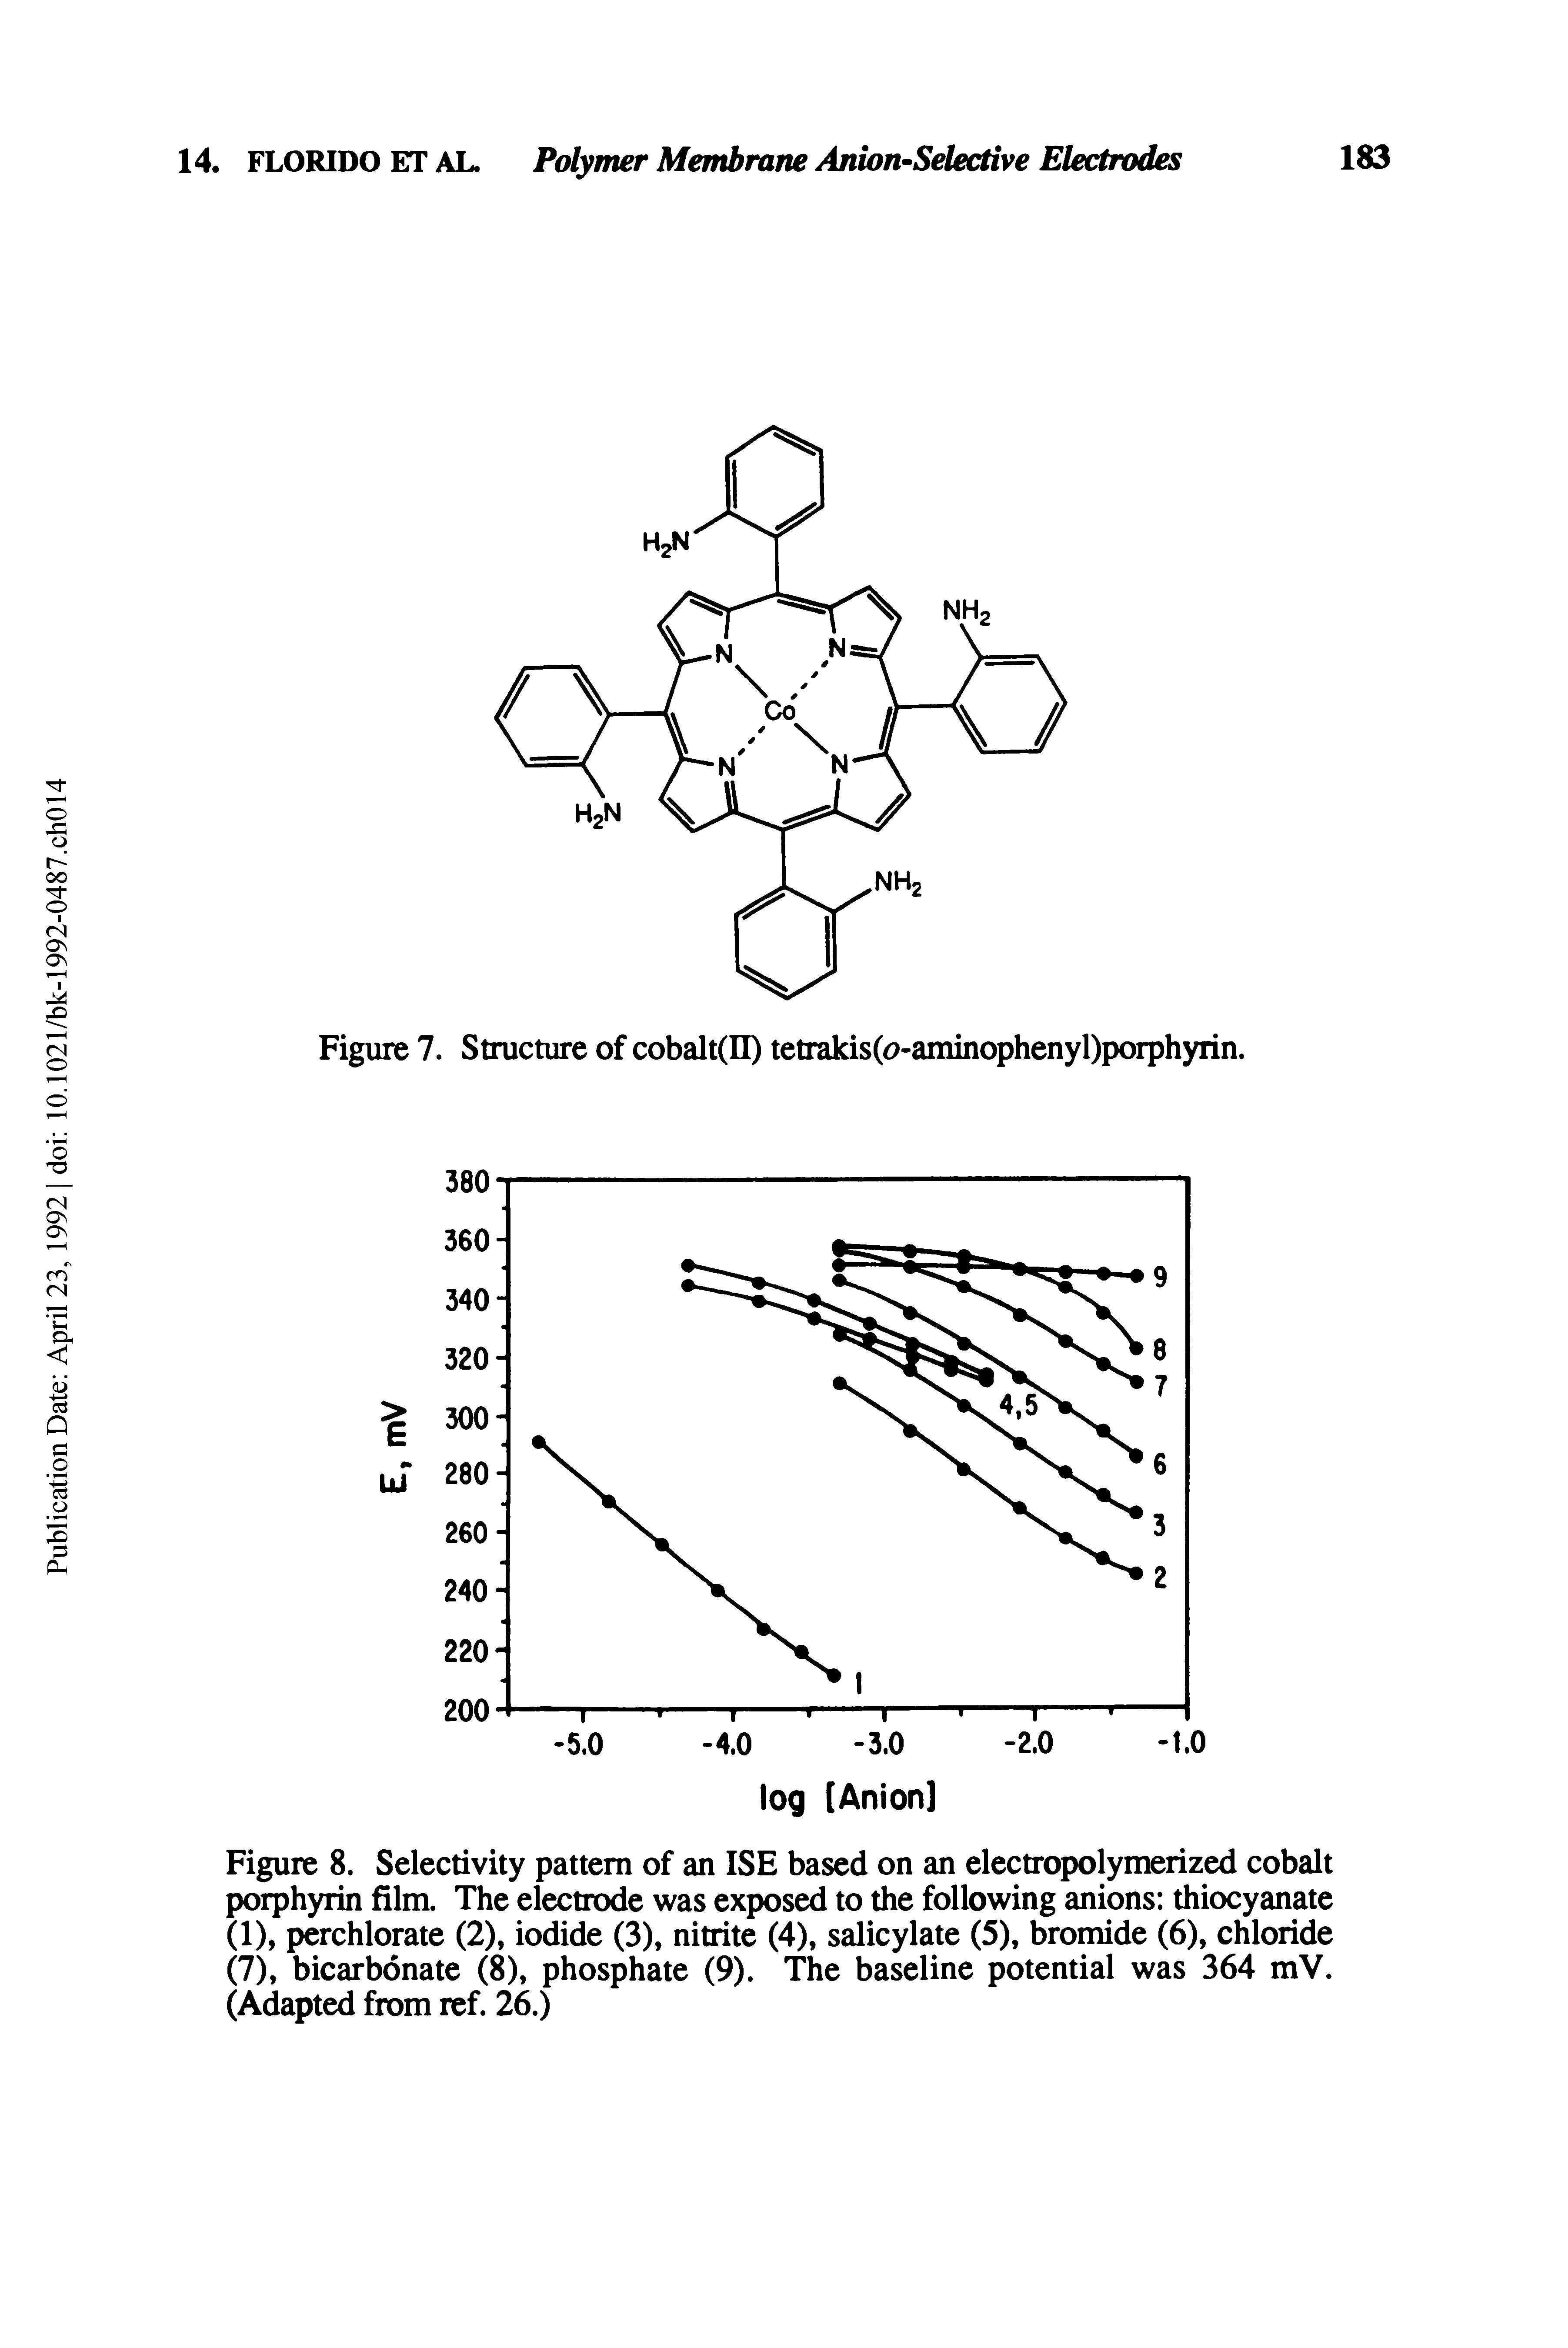 Figure 8. Selectivity pattern of an ISE based on an electropolymerized cobalt porphyrin film. The electrode was exposed to the following anions thiocyanate (1), perchlorate (2), iodide (3), nitrite (4), salicylate (5), bromide (6), chloride (7), bicarbonate (8), phosphate (9). The baseline potential was 364 mV. (Adapted from ref. 26.)...